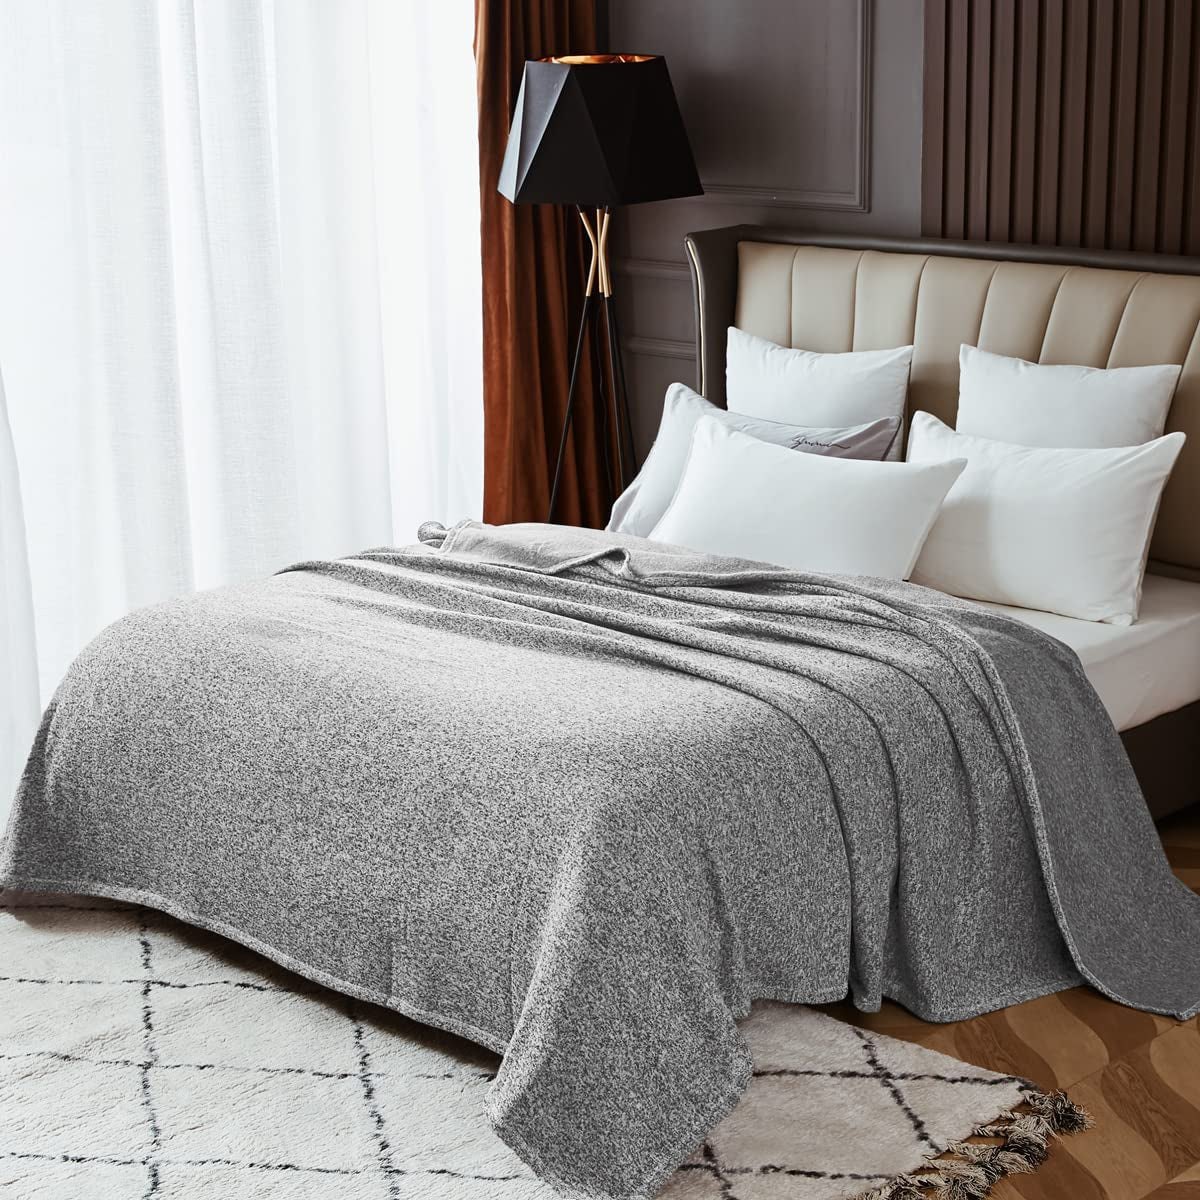 Premium King Size Jersey Knit Sweatshirt Blanket - Lightweight, Breathable, and Soft Summer Blanket for All Seasons - 108"X 90" - Grey and White